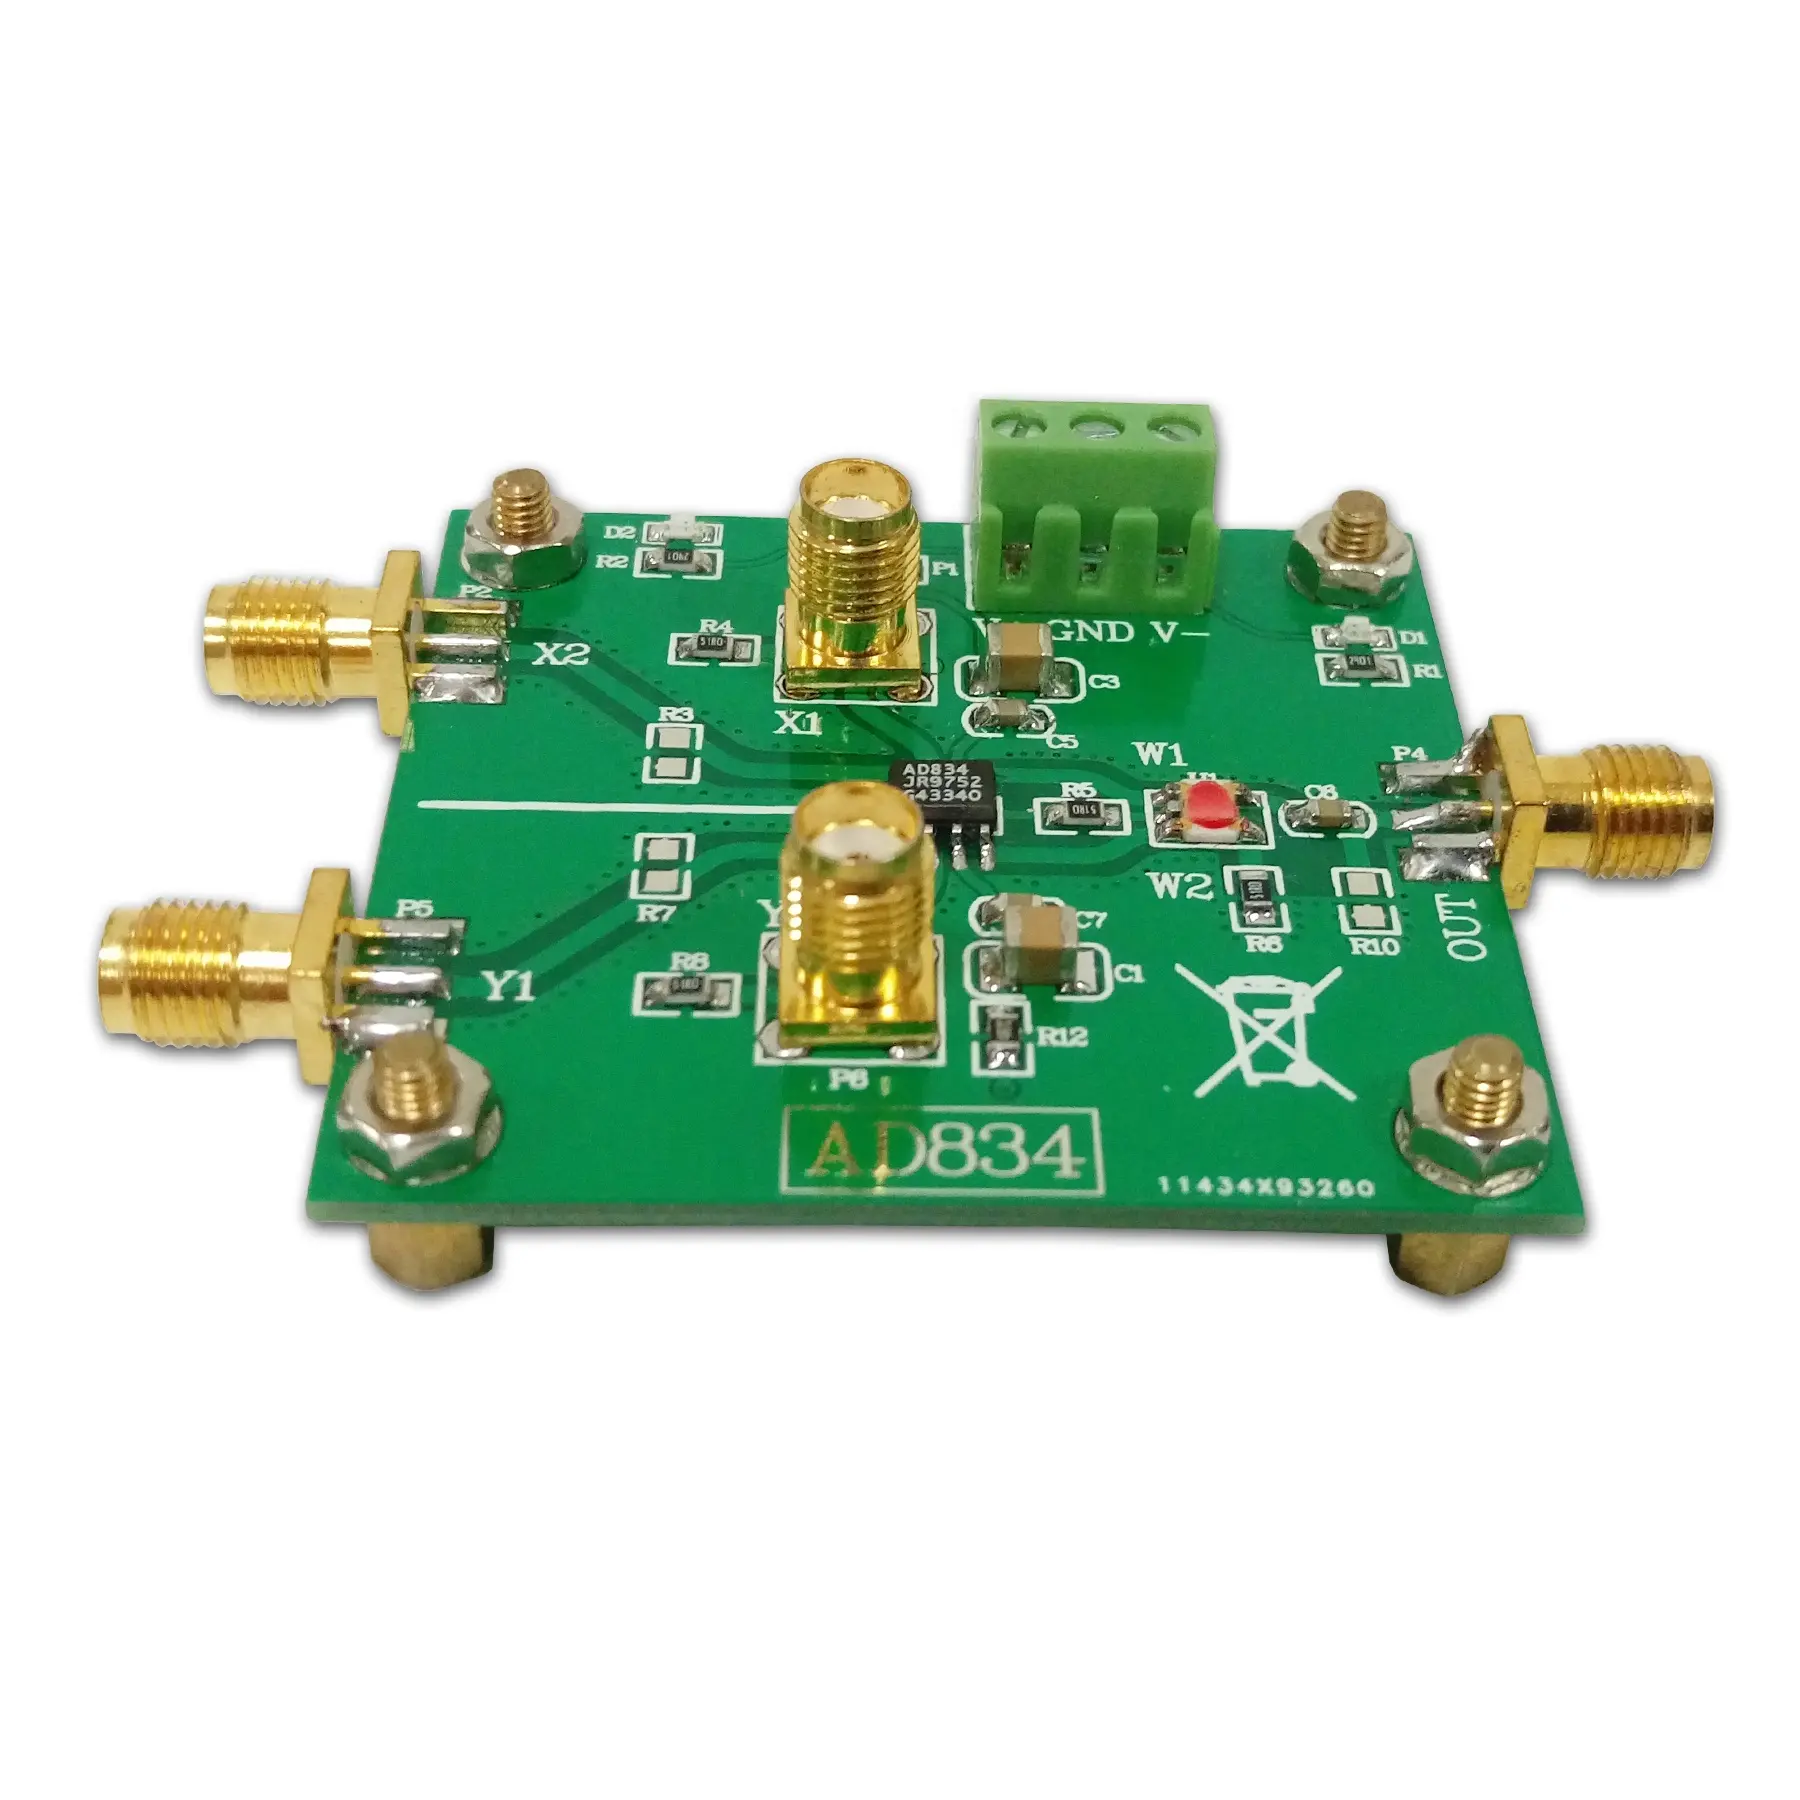 Taidacent AD834 multiplier using op amp modulation power control high speed UHF band 4 quadrant analog frequency multiplier